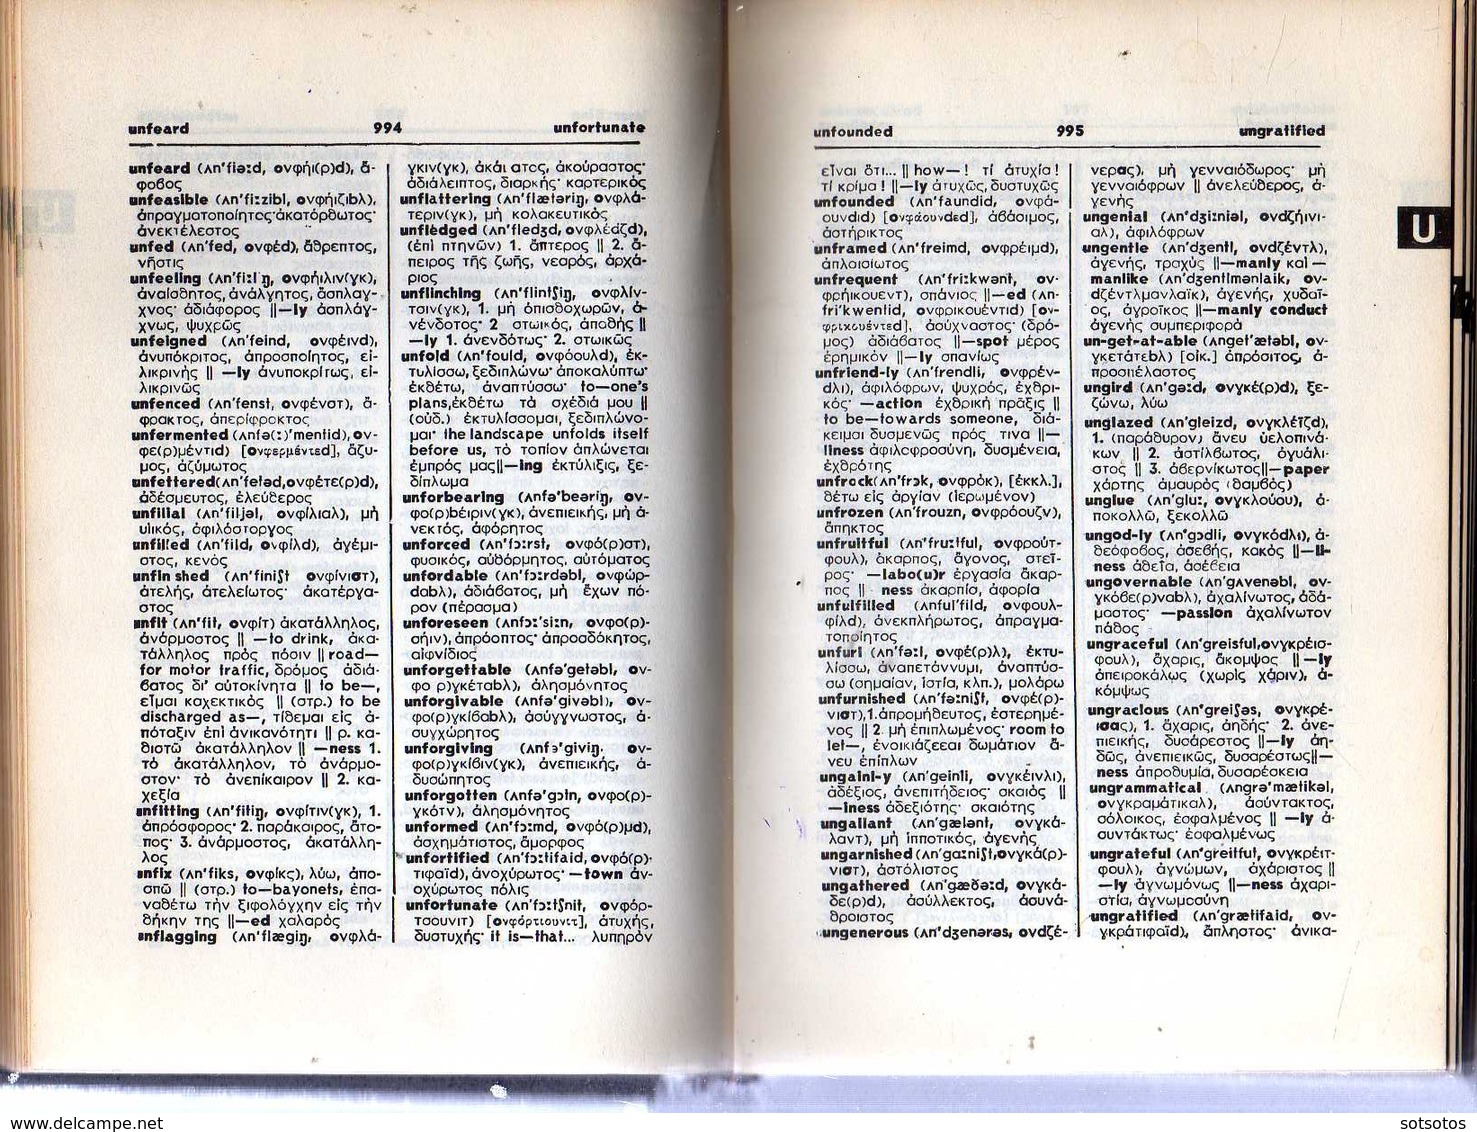 ENGLISH-GREEK and GREEK-ENGLISH DICTIONARY 2 volumes (1976)  - 1120+700 pages